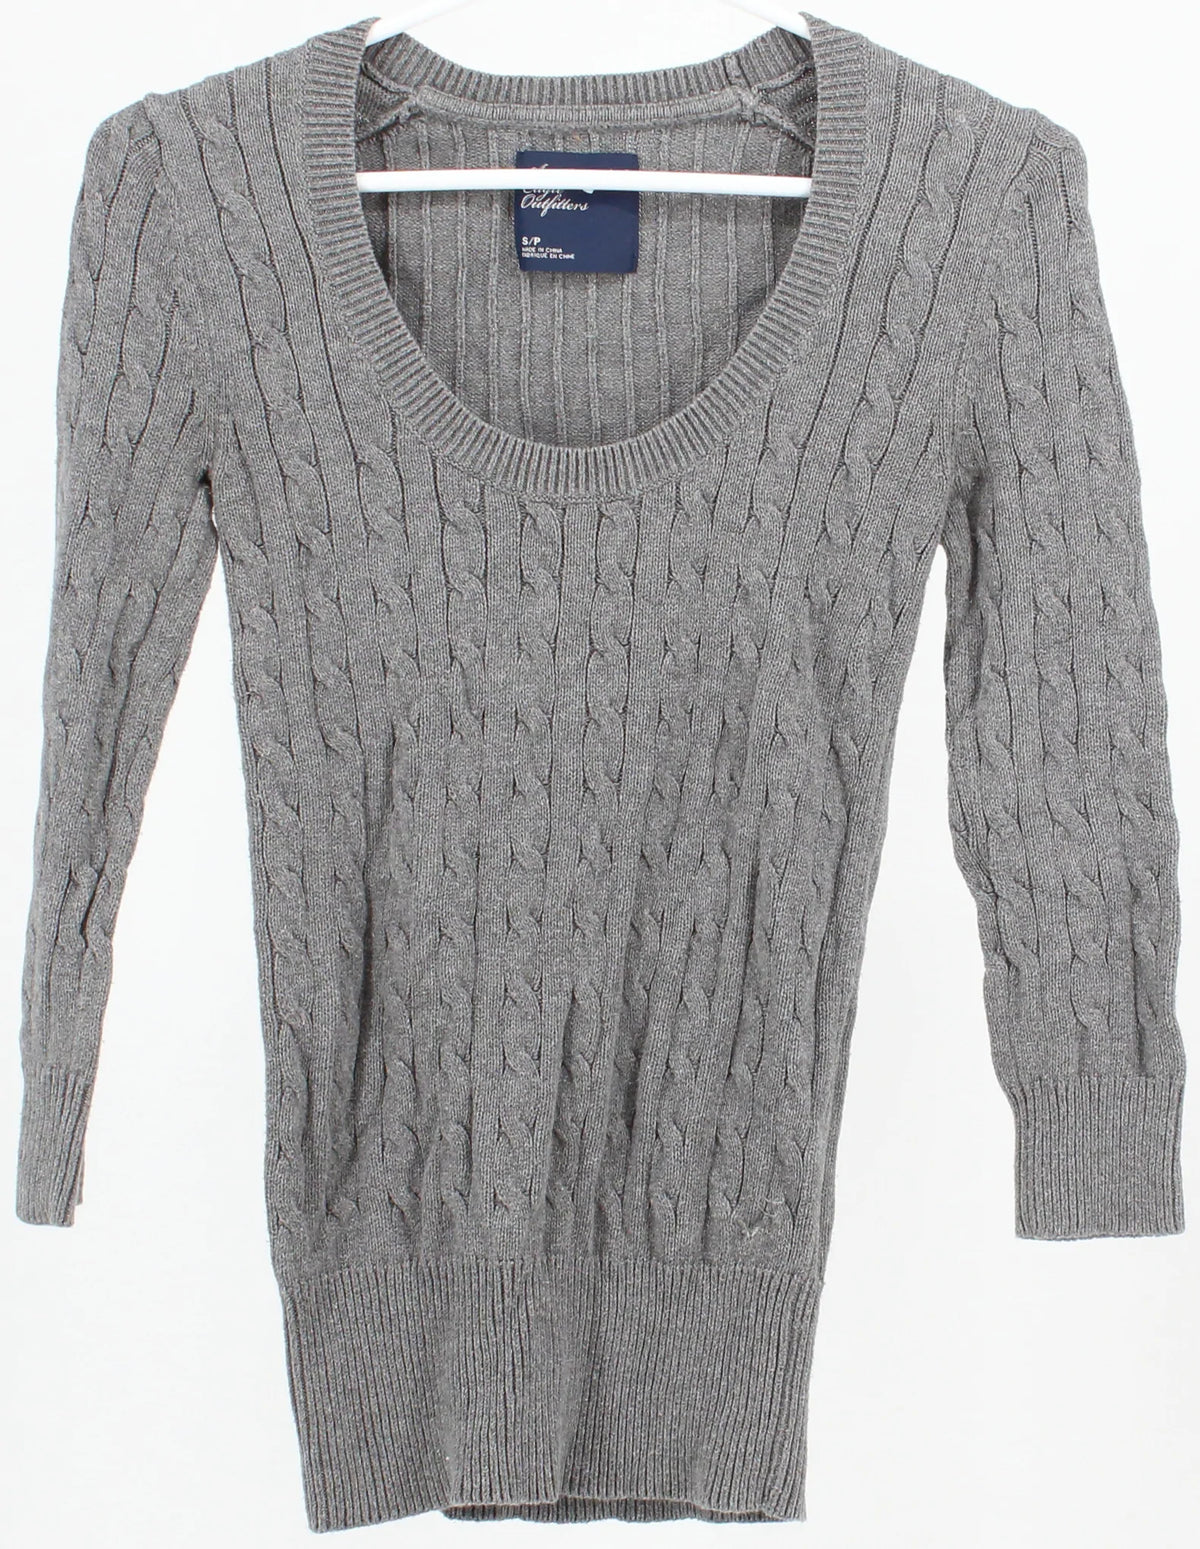 American Eagle Outfitters Grey Sweater